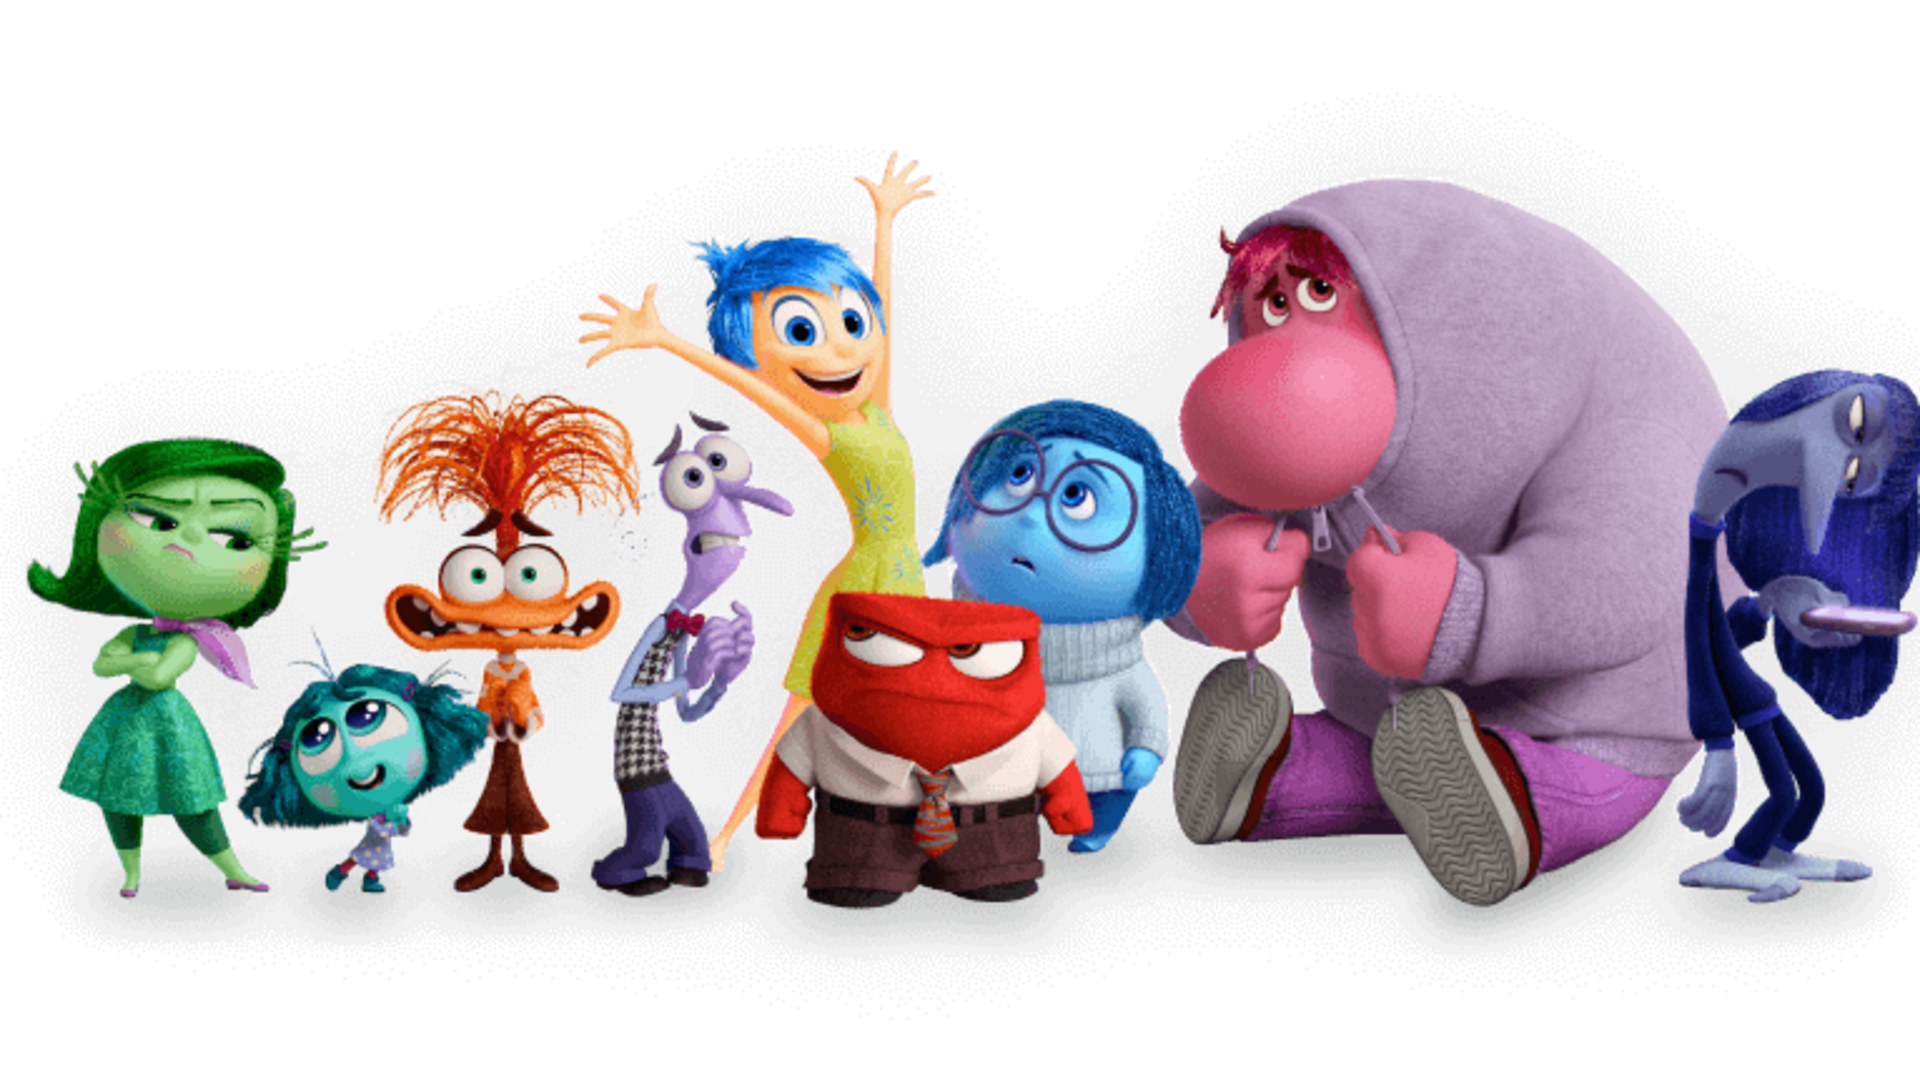 'Inside Out' might succeed 'Toy Story' as Pixar's leading franchise